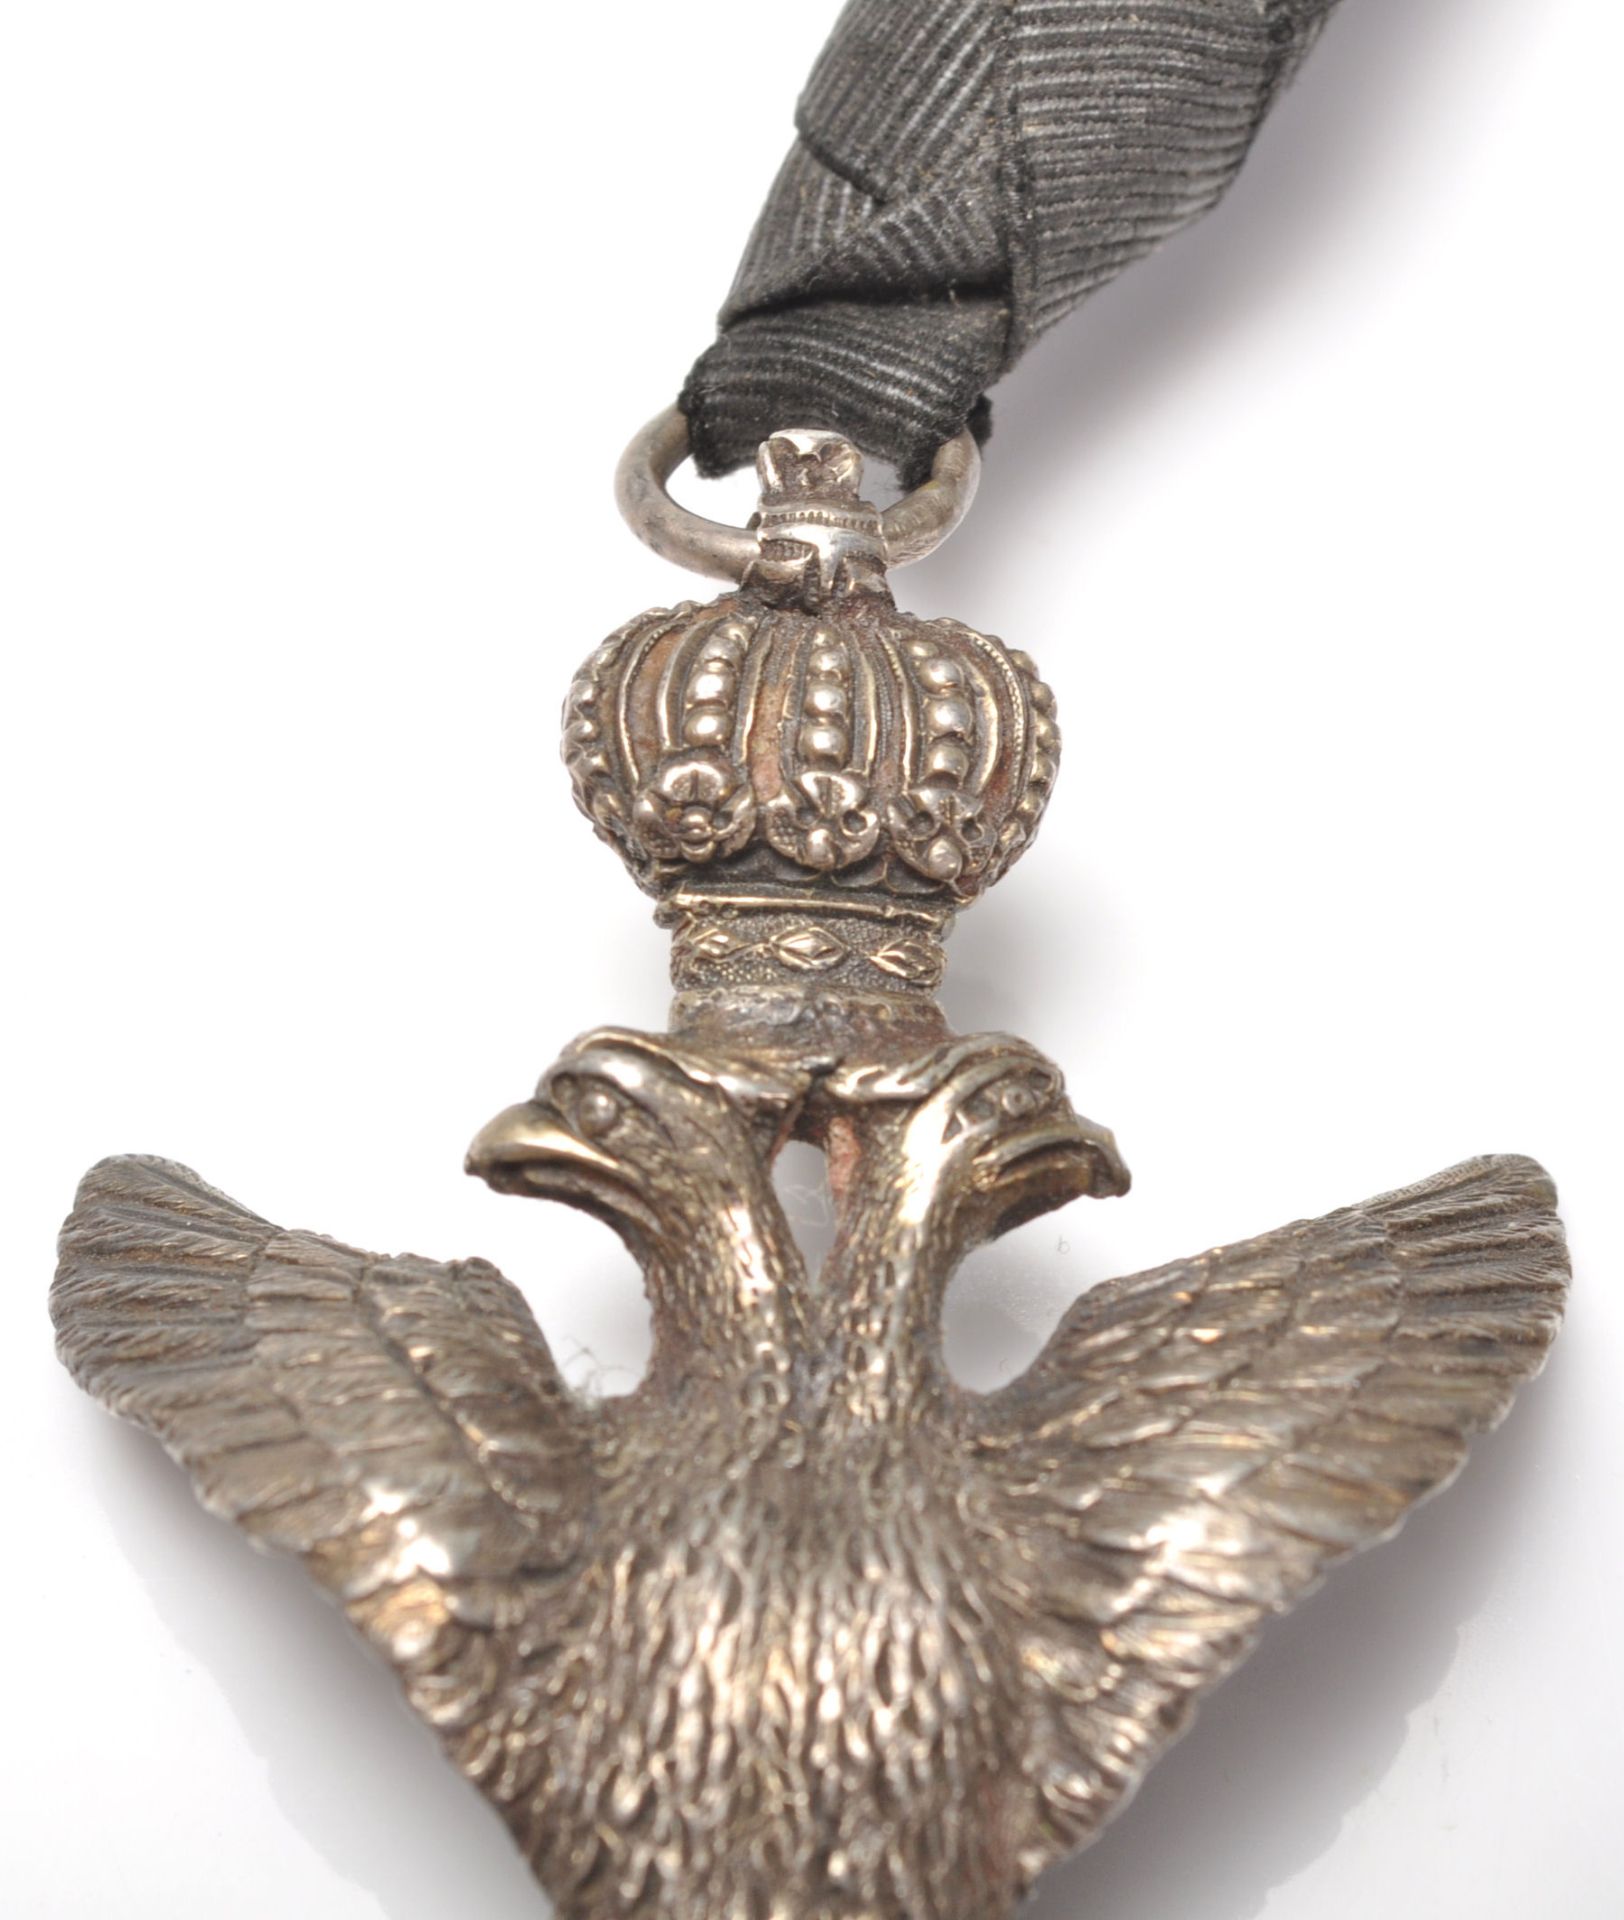 A 20th century cast metal Masonic double headed eagle medal modelled with a crown and holding a - Bild 3 aus 6